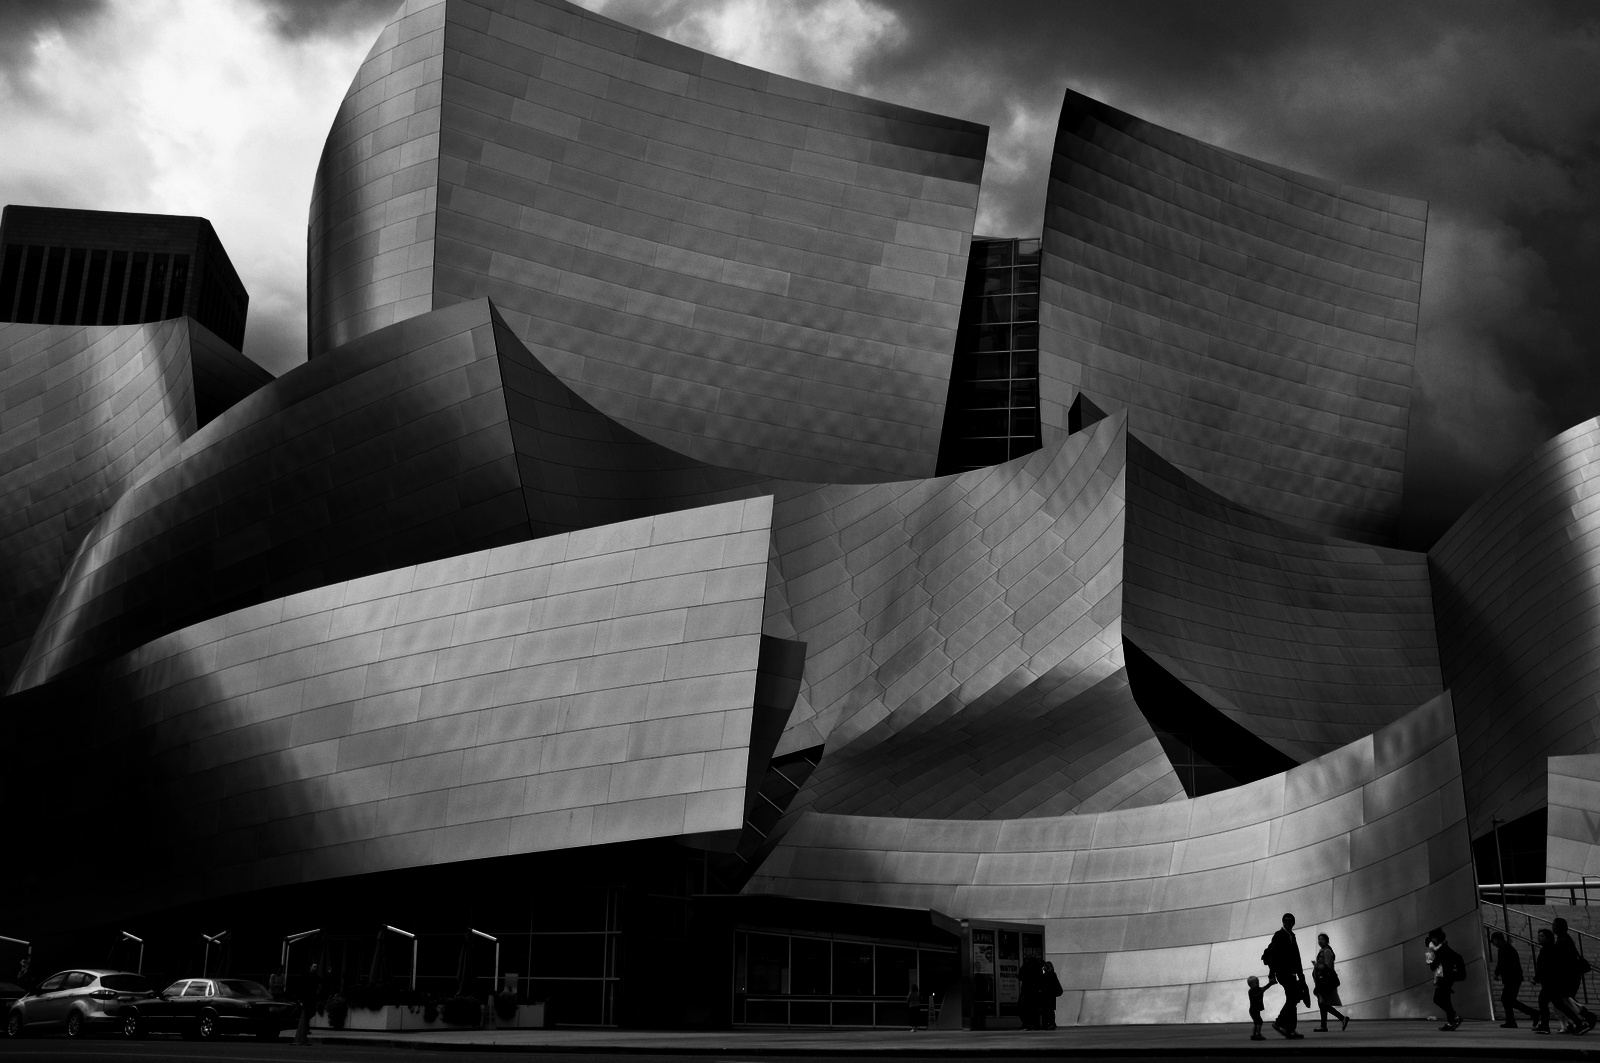 Black and White street view of Walt Disney Concert Hall in Los Angeles